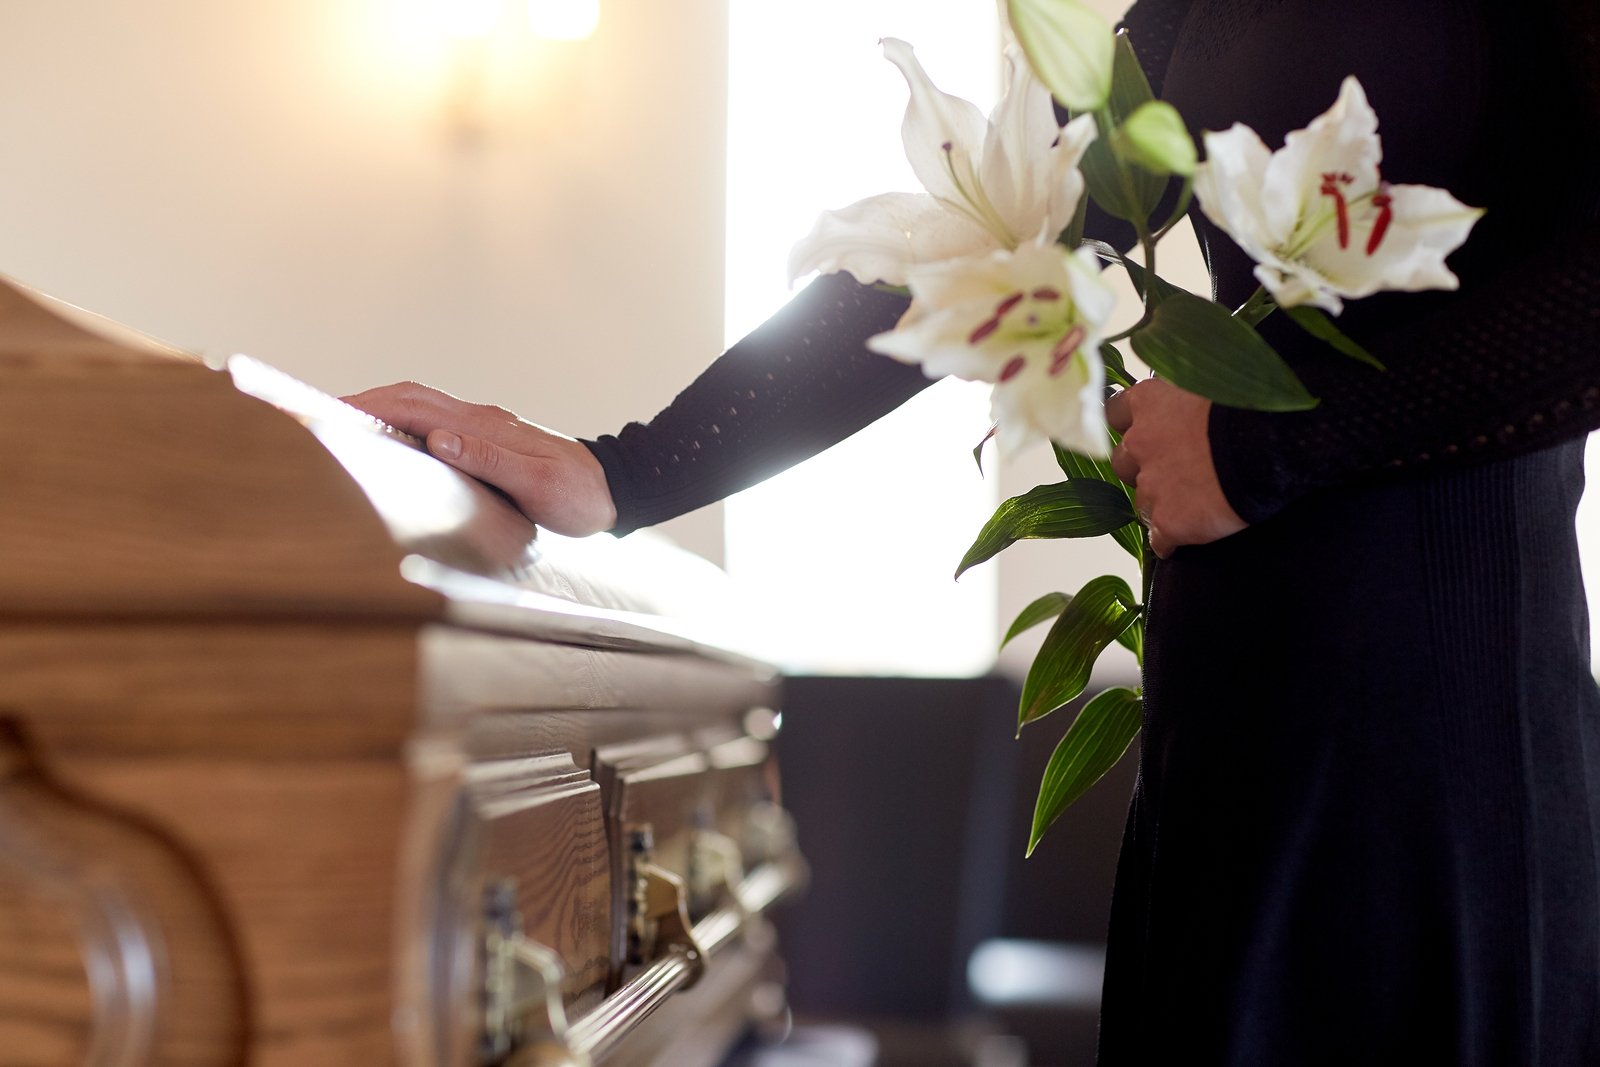 A Mourner Touches the Casket of a Loved One